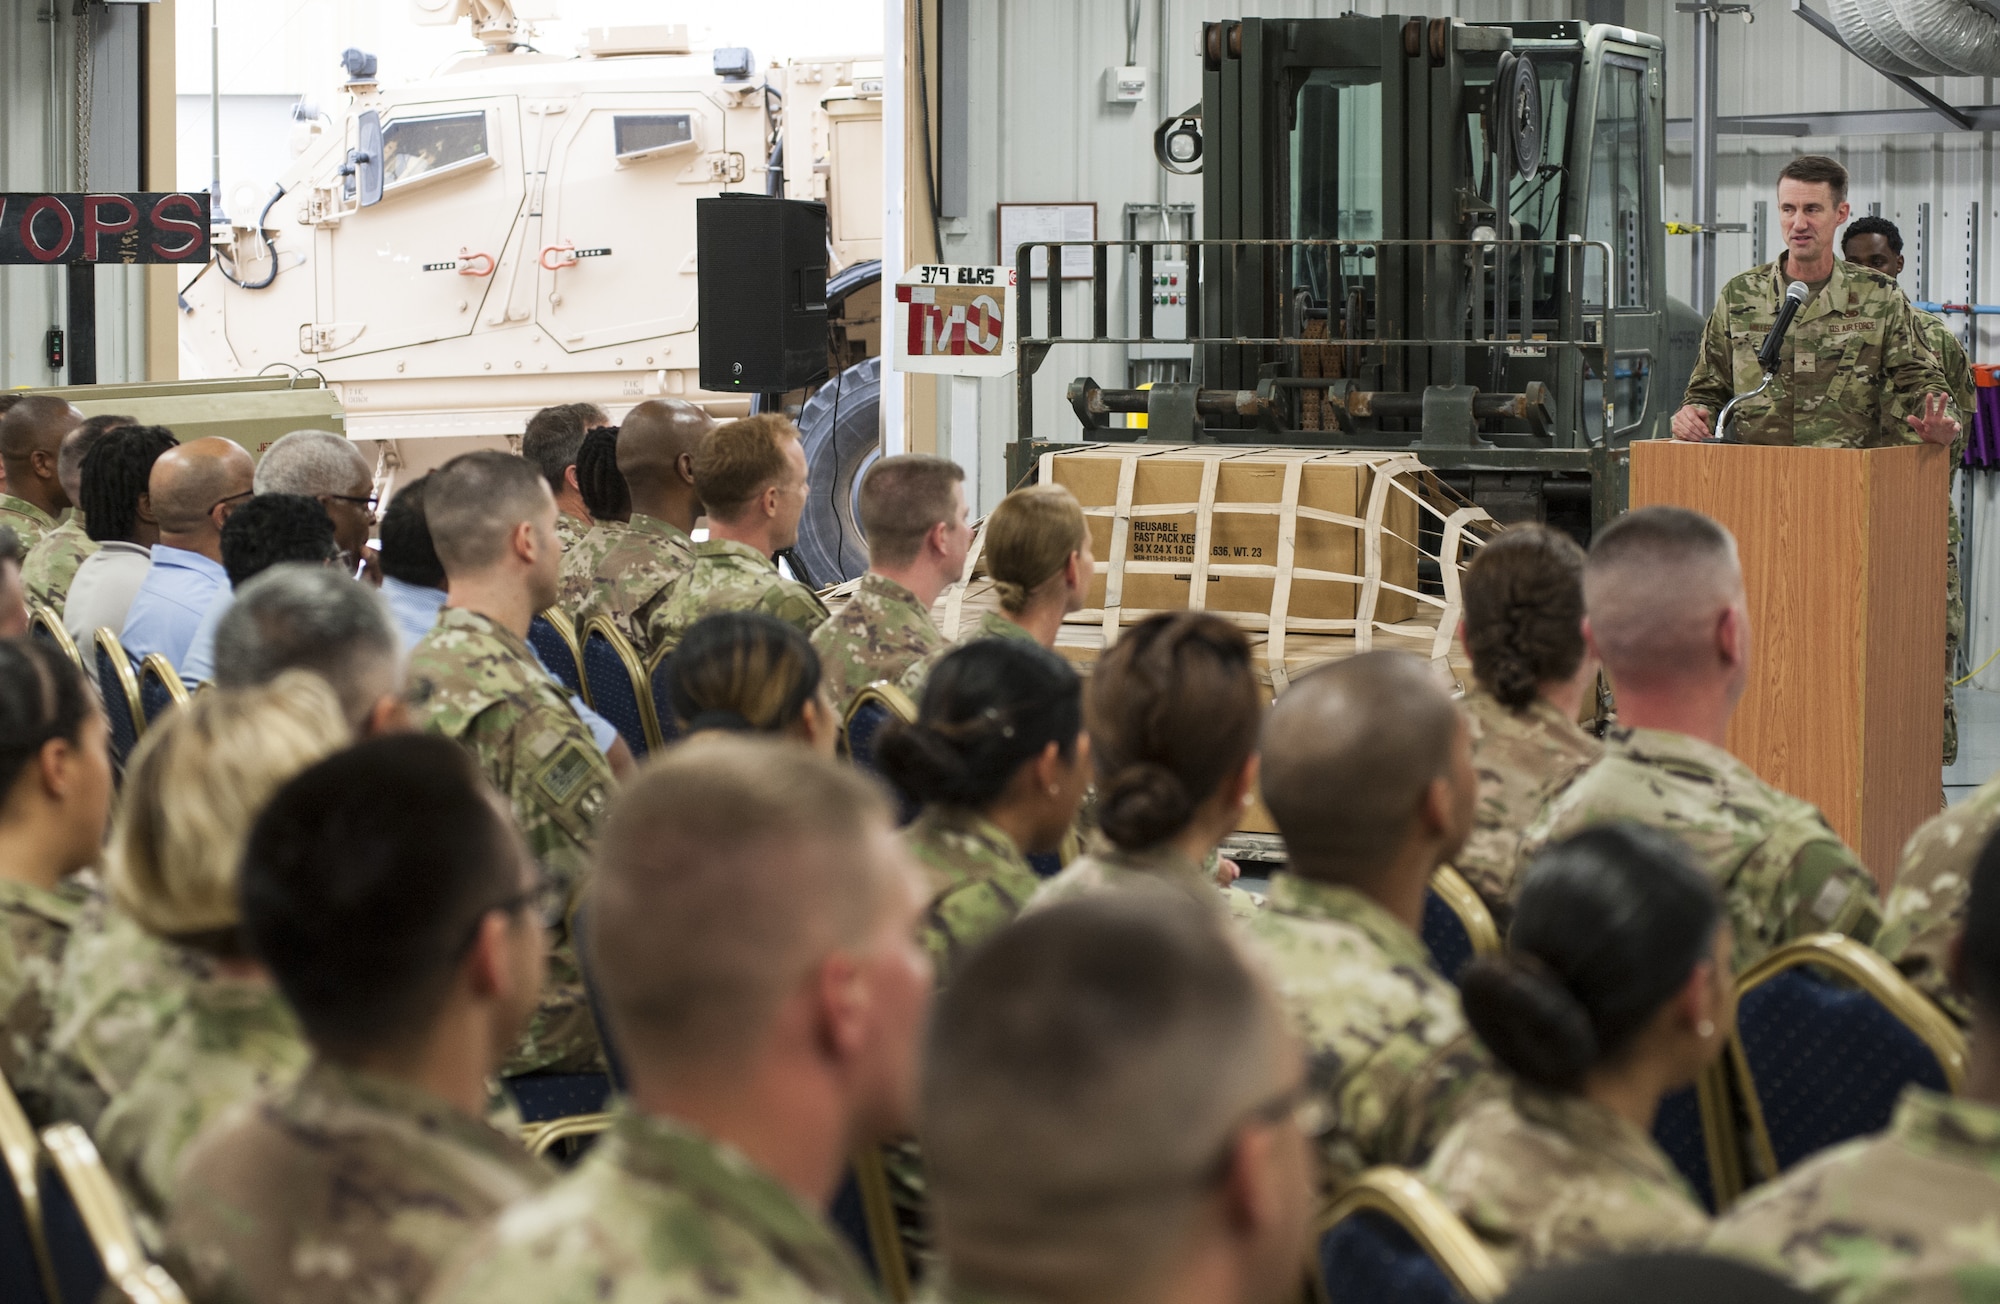 Brig. Gen. Tom Miller, Air Combat Command director of Logistics, Engineering, and Force Protection, speaks during a “Daedalian” award ceremony in honor of the 379th Expeditionary Logistics Readiness Squadron, Feb. 11, 2019 at Al Udeid Air Base, Qatar.